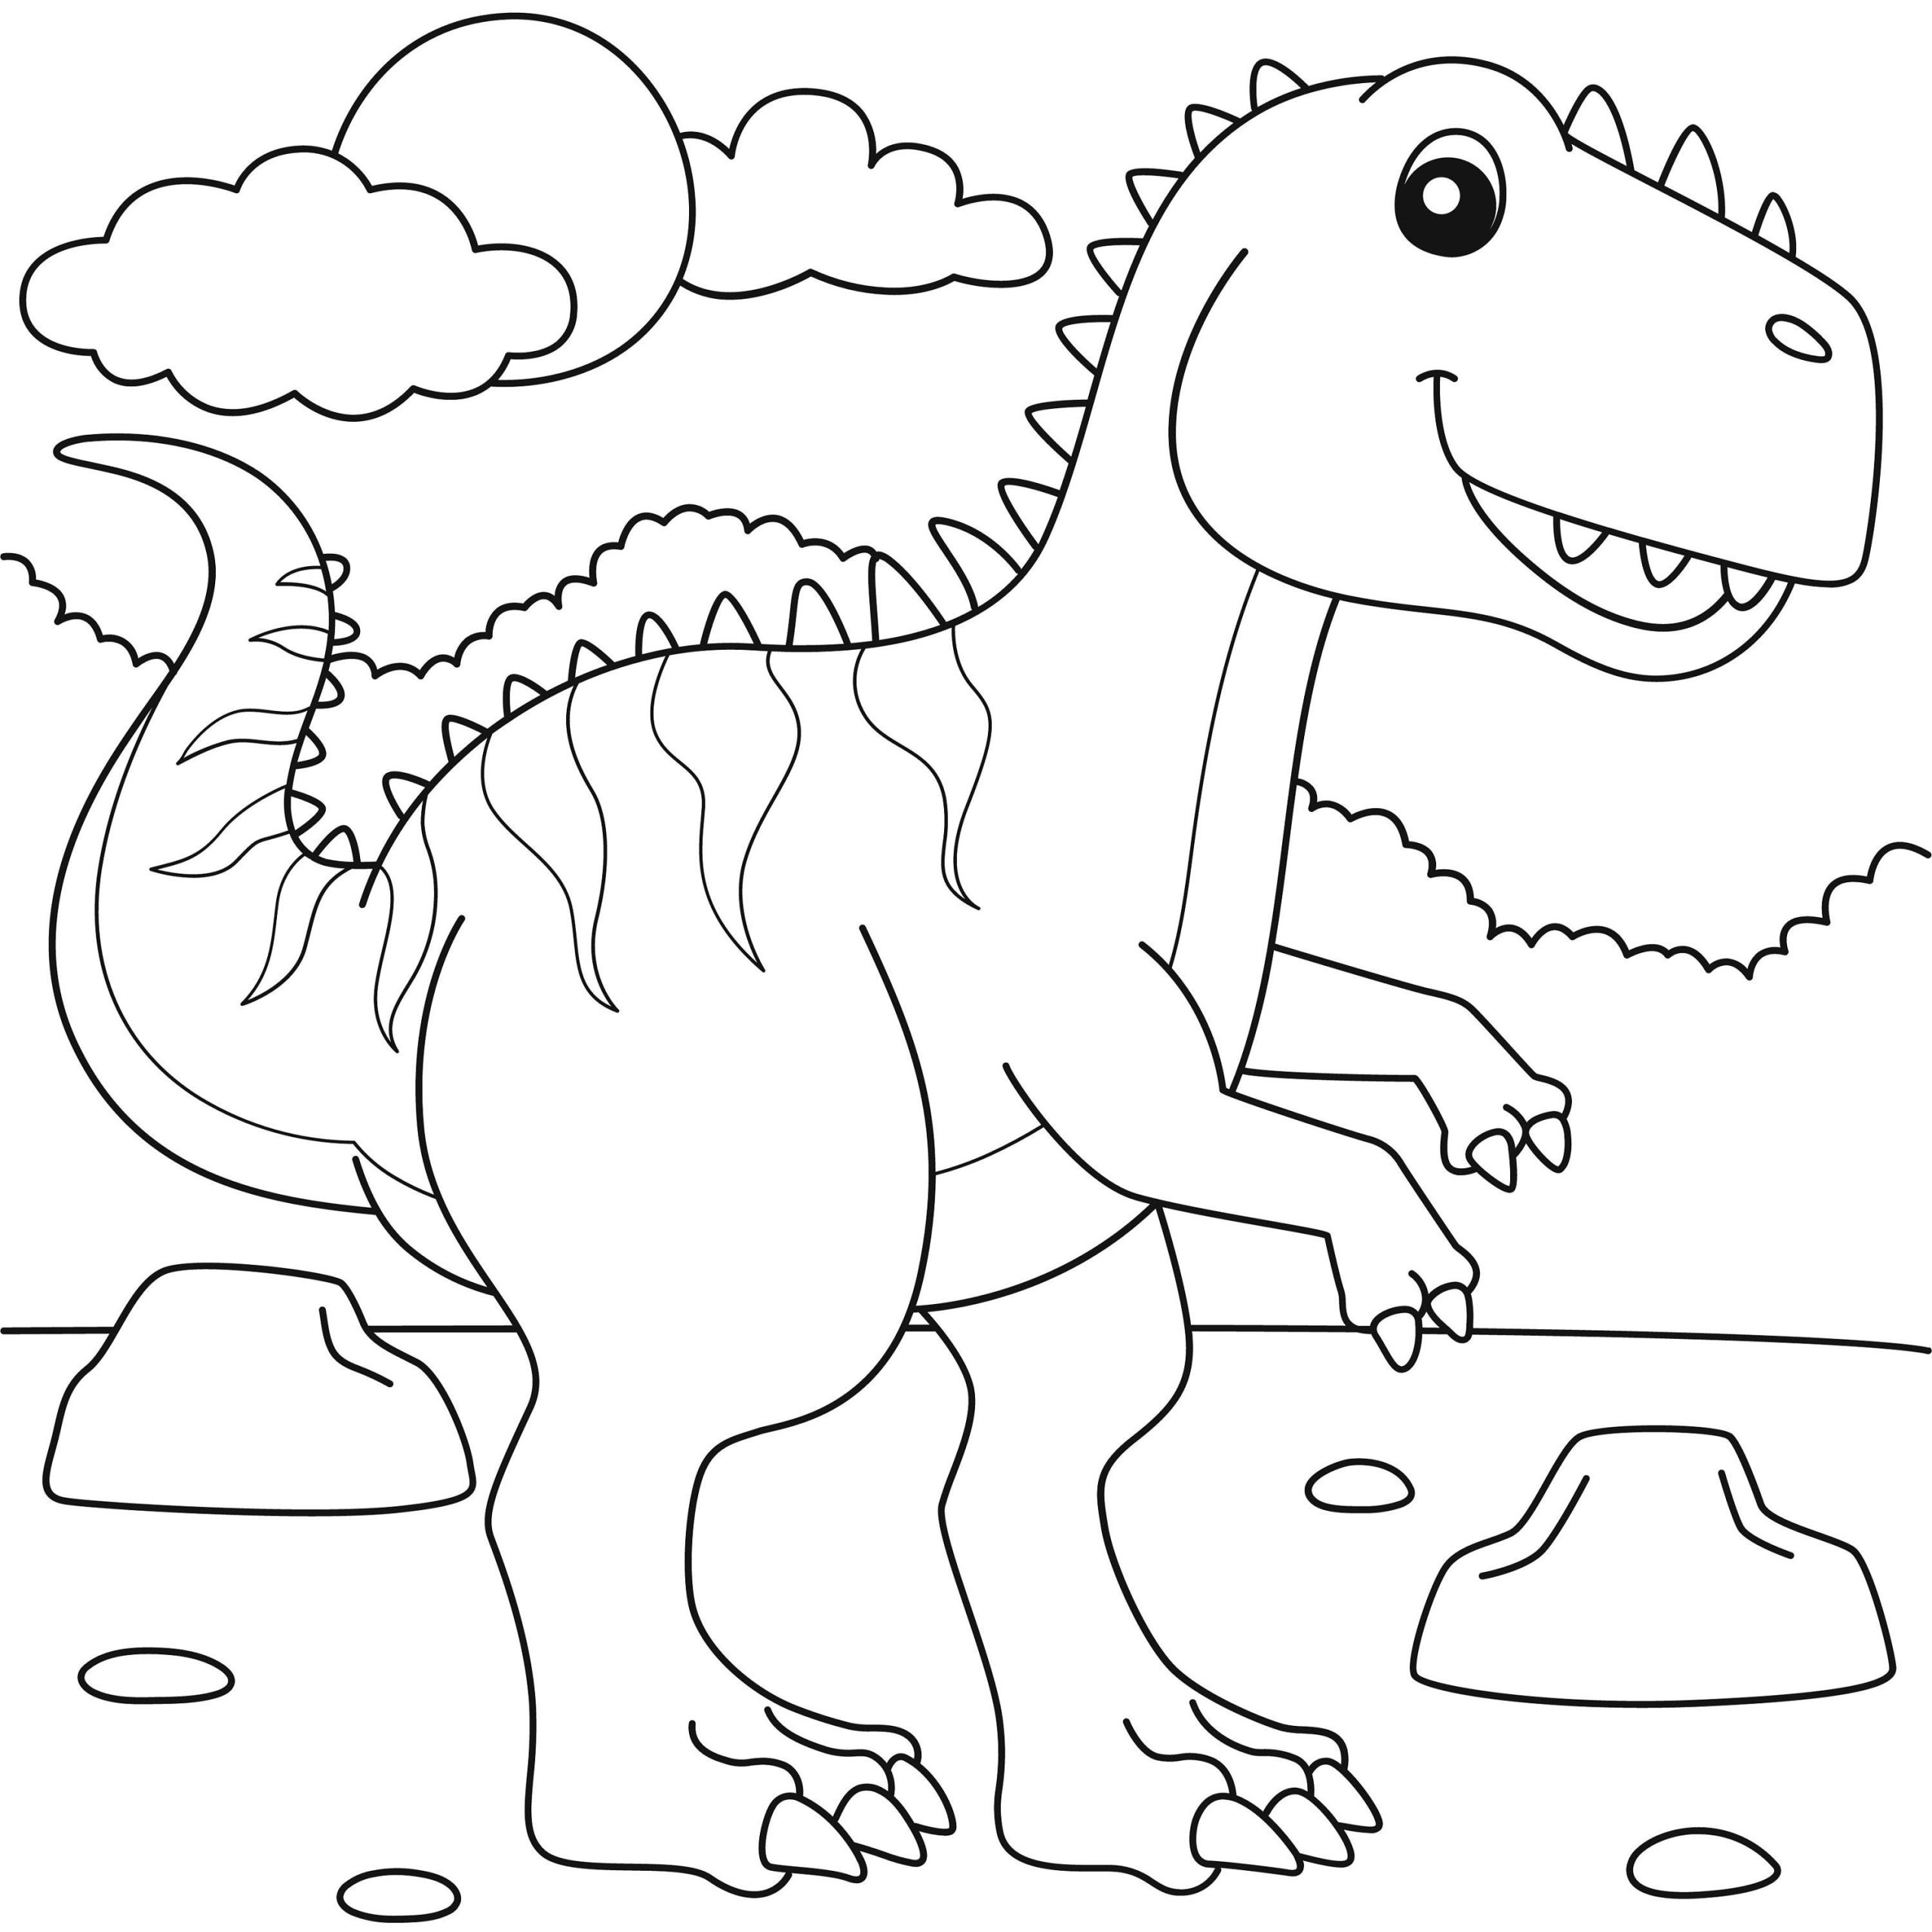 10 Printable Dinosaur Coloring pages for Kids, Colouring pages, Color Dinosaurs for Kids